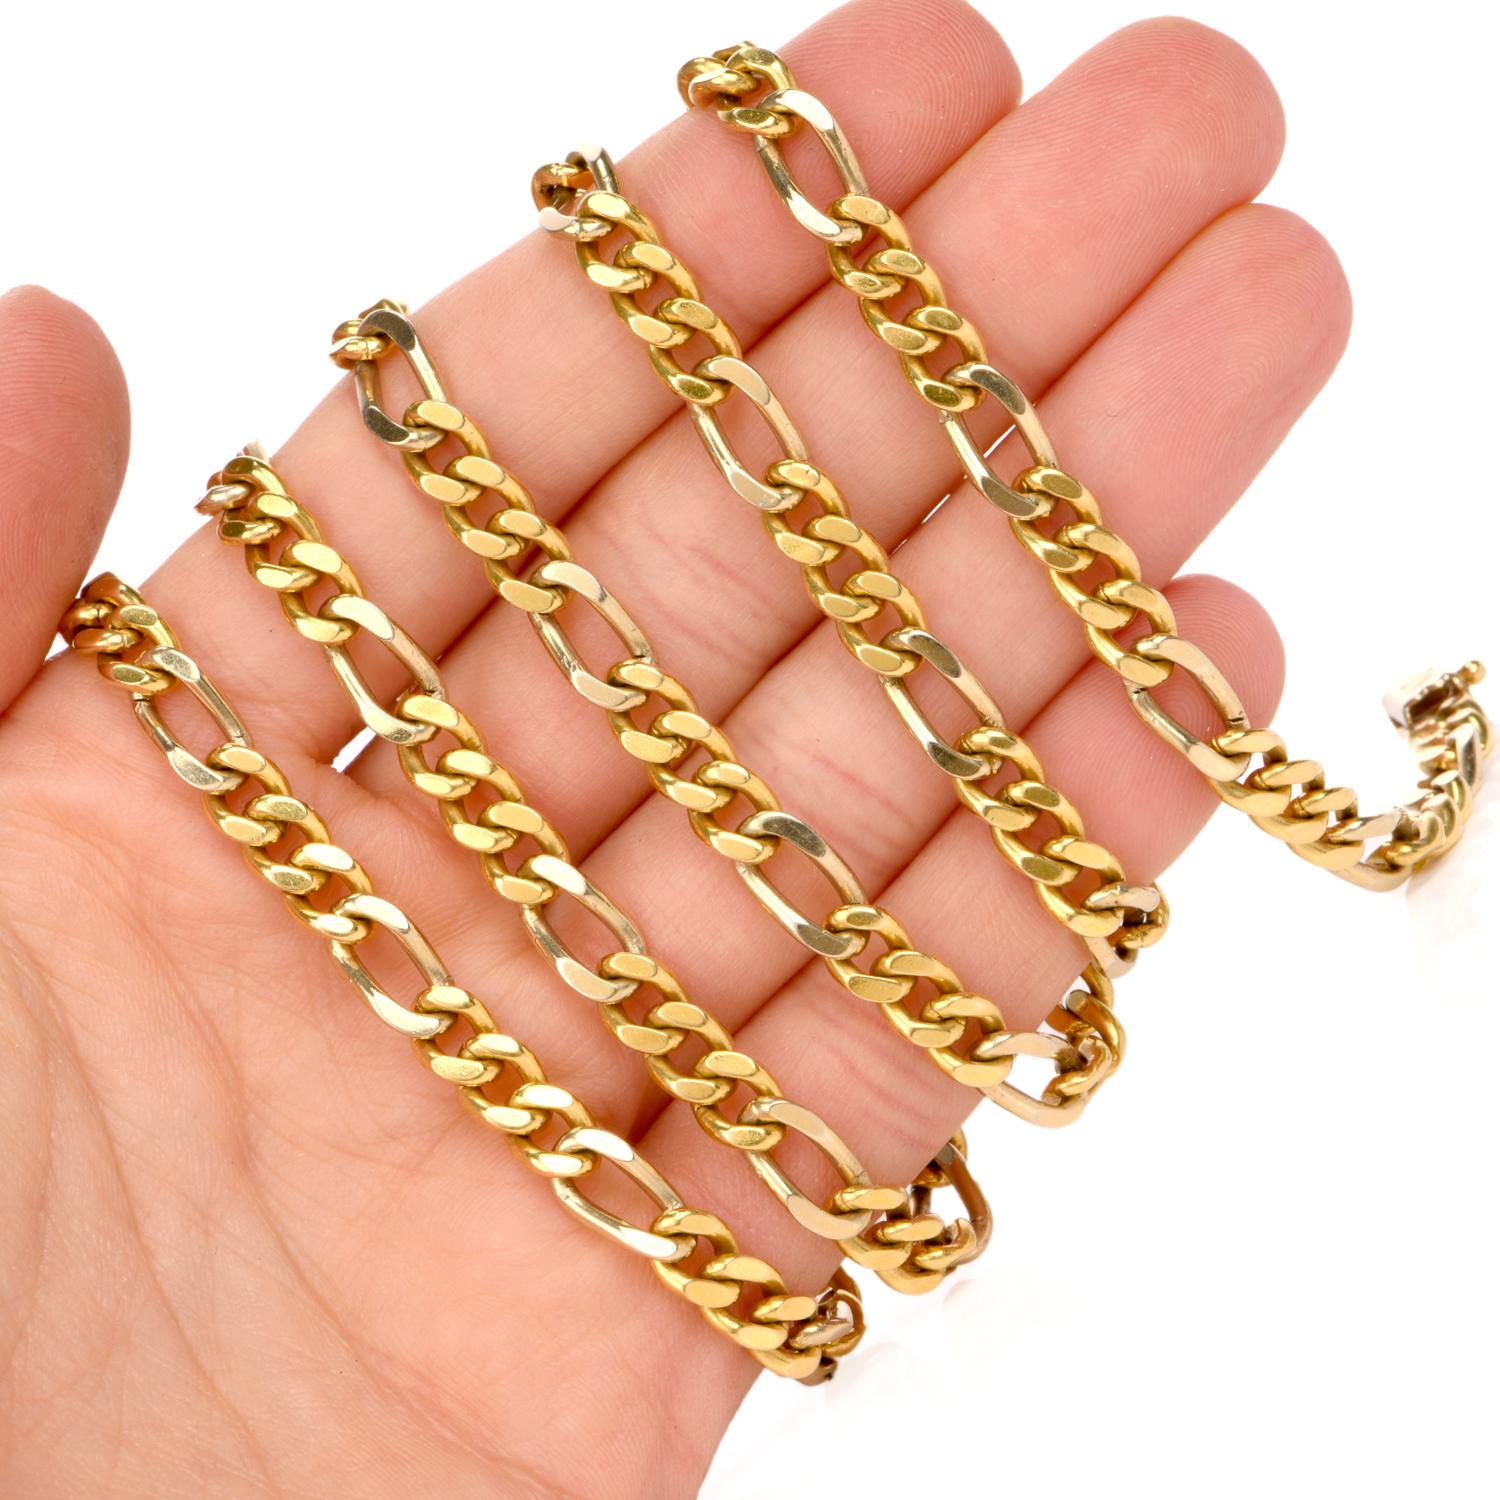 This long figaro chain necklace is crafted in solid 18 karat yellow gold. Composed of a figaro link pattern, measuring 32 inchese long. The chain length offers the versatility of wearing it as single strand, a double strand and/or attaching a